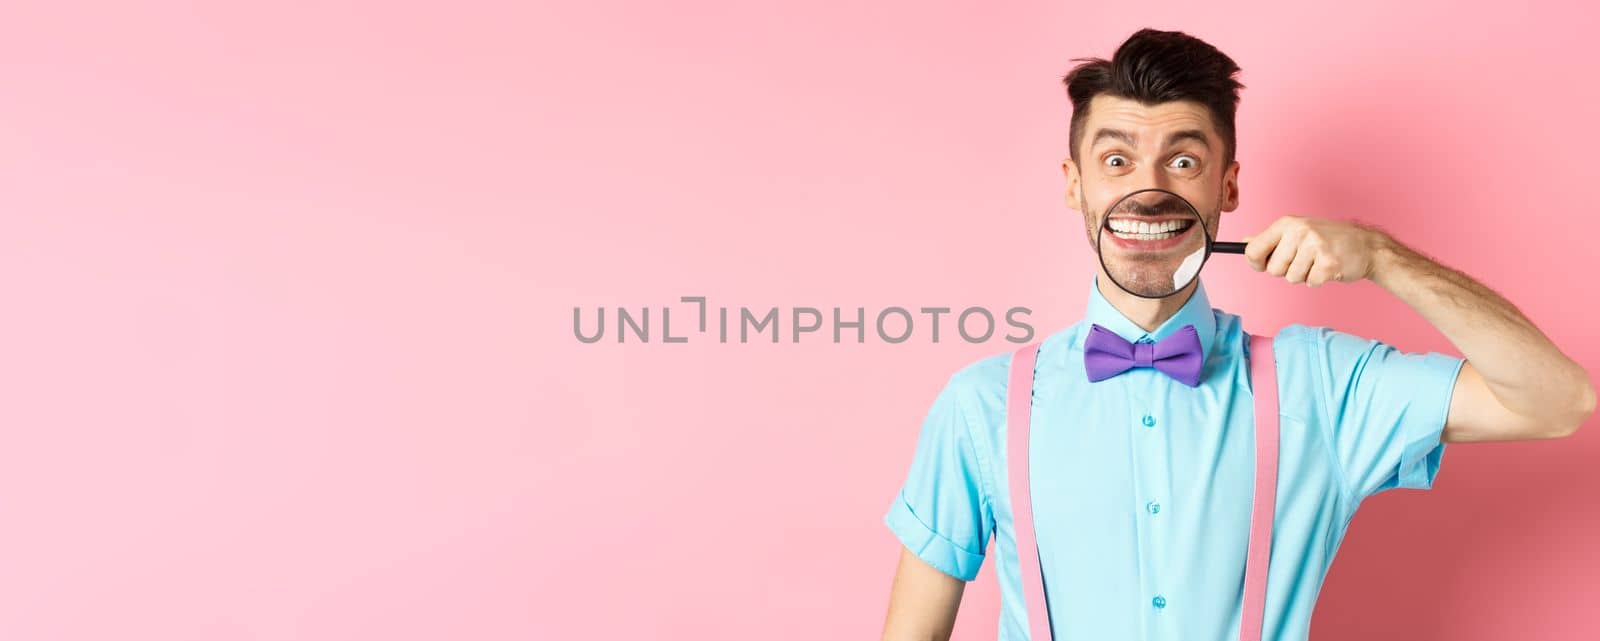 Funny caucasian guy in bow-tie showing his white smile teeth with magnifying glass, looking cheerful at camera, standing on pink background.